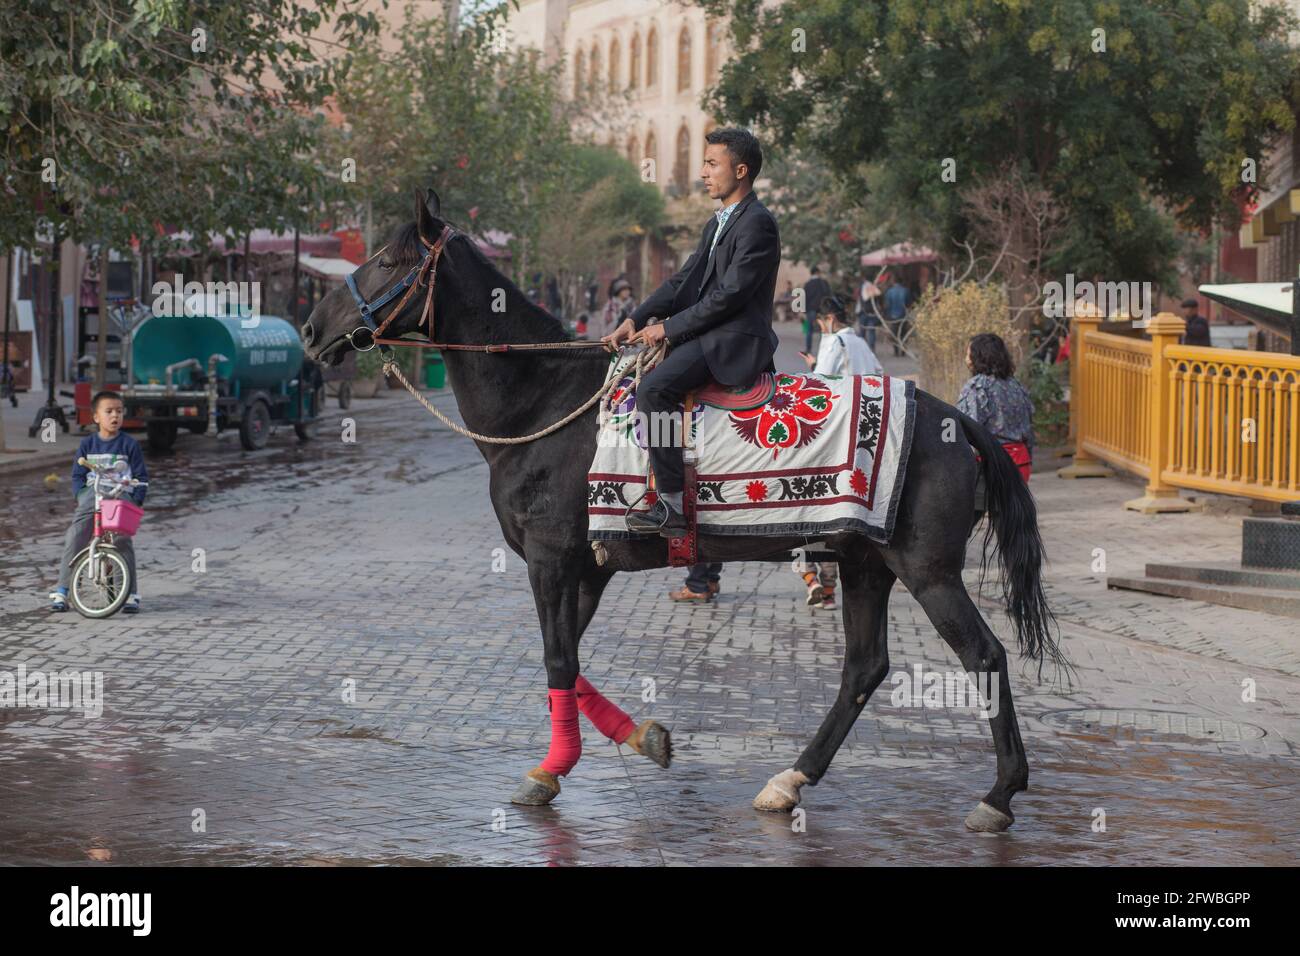 Man on top of an ornate horse walks down the street of Kashgar and a child looks at him Kashgar, Xinkiang, Popular Republic of China, 2019 Stock Photo